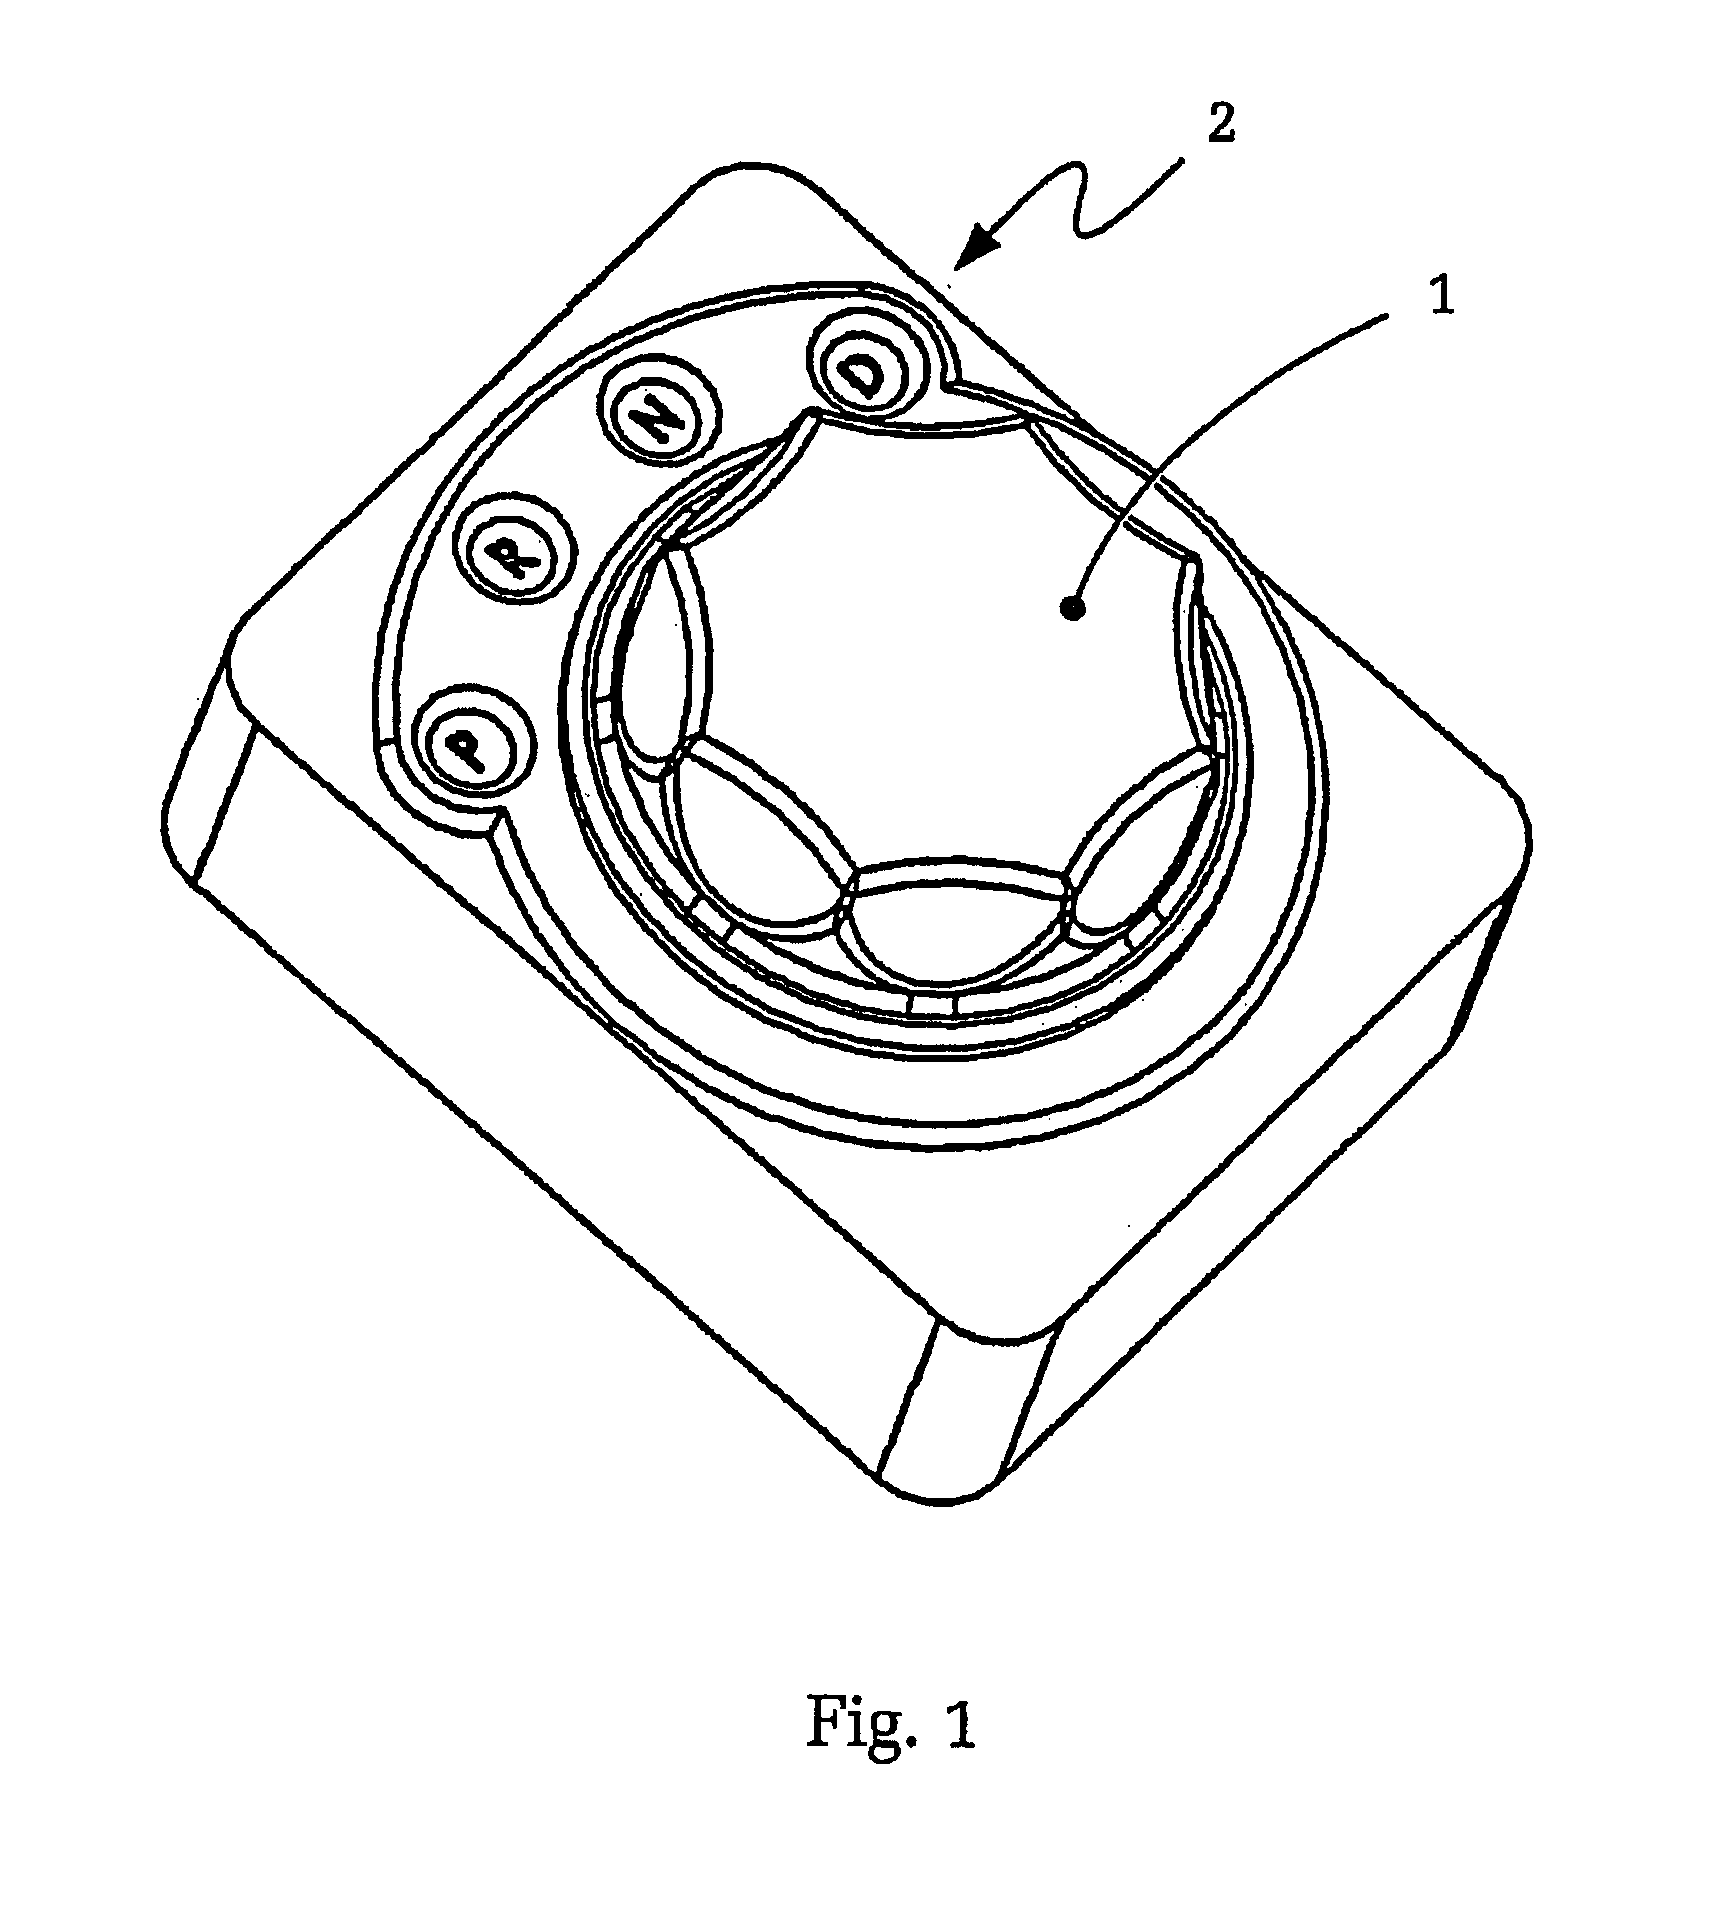 Actuating device for selecting fixed gear ratios of a gear changing transmission